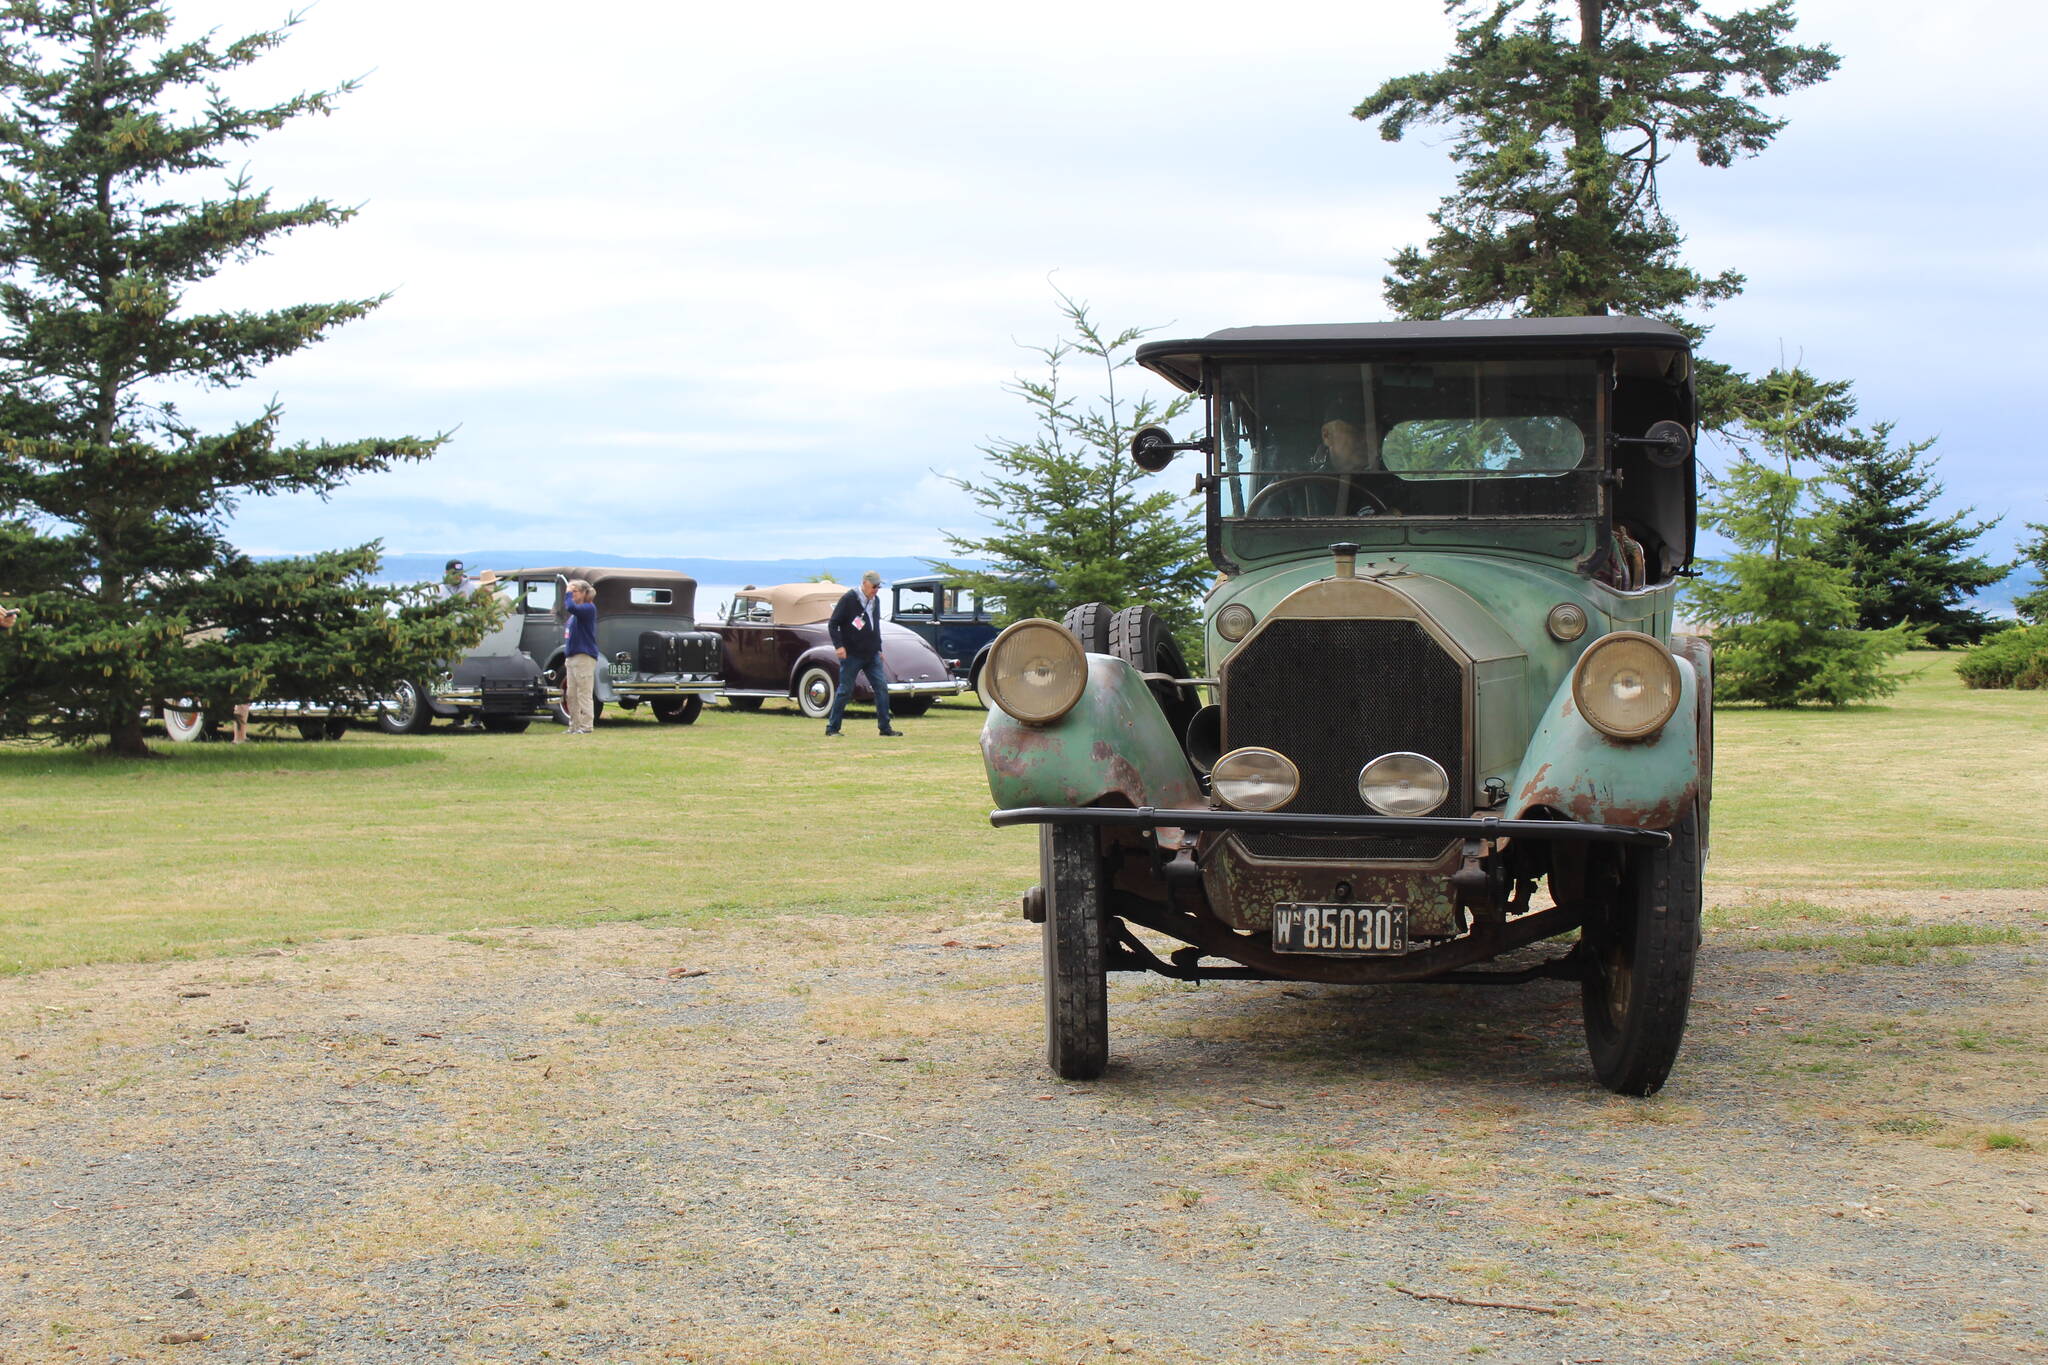 Photo by Karina Andrew
The oldest vehicle on the tour was Richard Anderson's 1918 Pierce-Arrow.